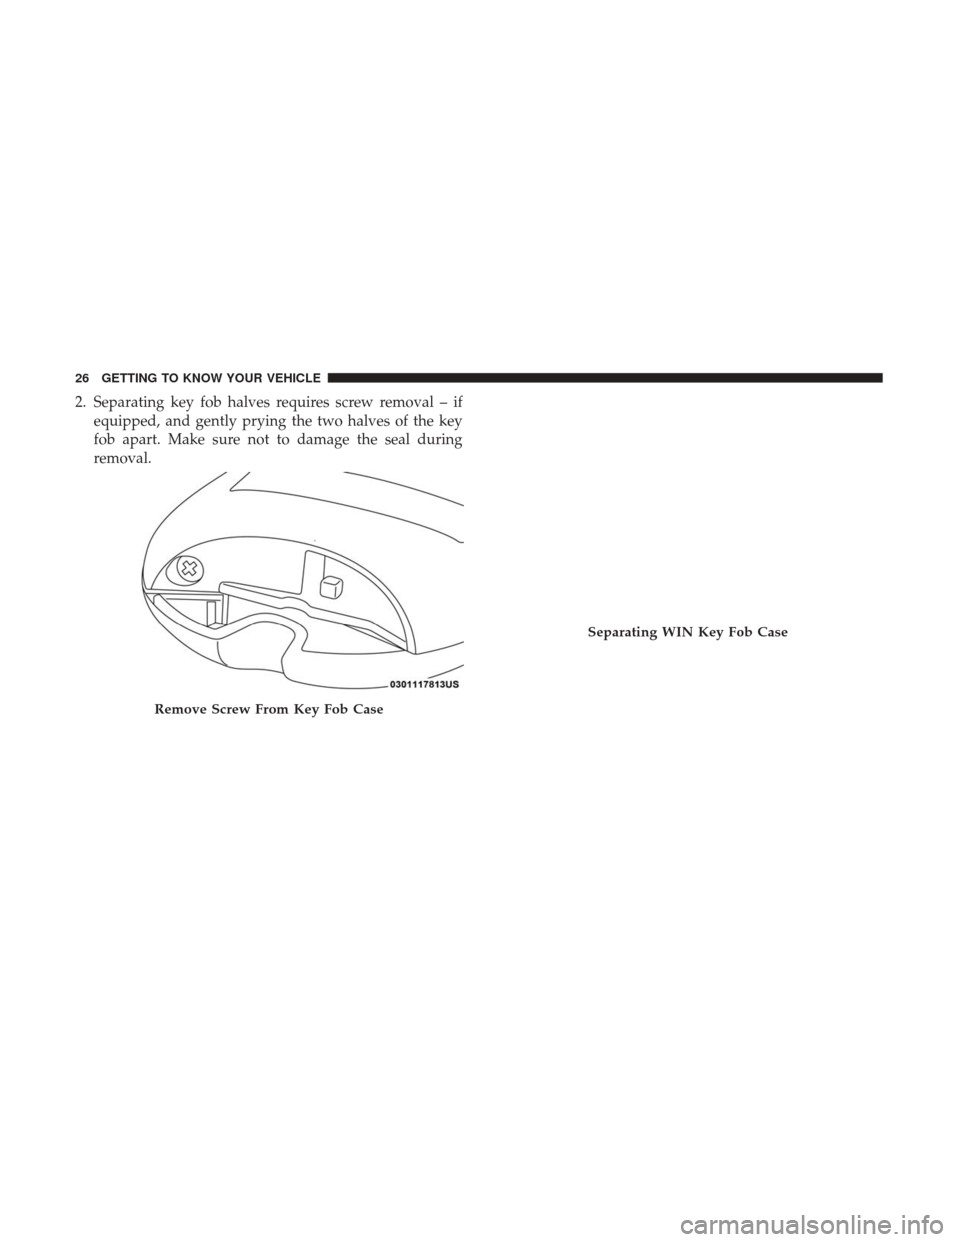 Ram 2500 2018  Owners Manual 2. Separating key fob halves requires screw removal – ifequipped, and gently prying the two halves of the key
fob apart. Make sure not to damage the seal during
removal.
Remove Screw From Key Fob Ca